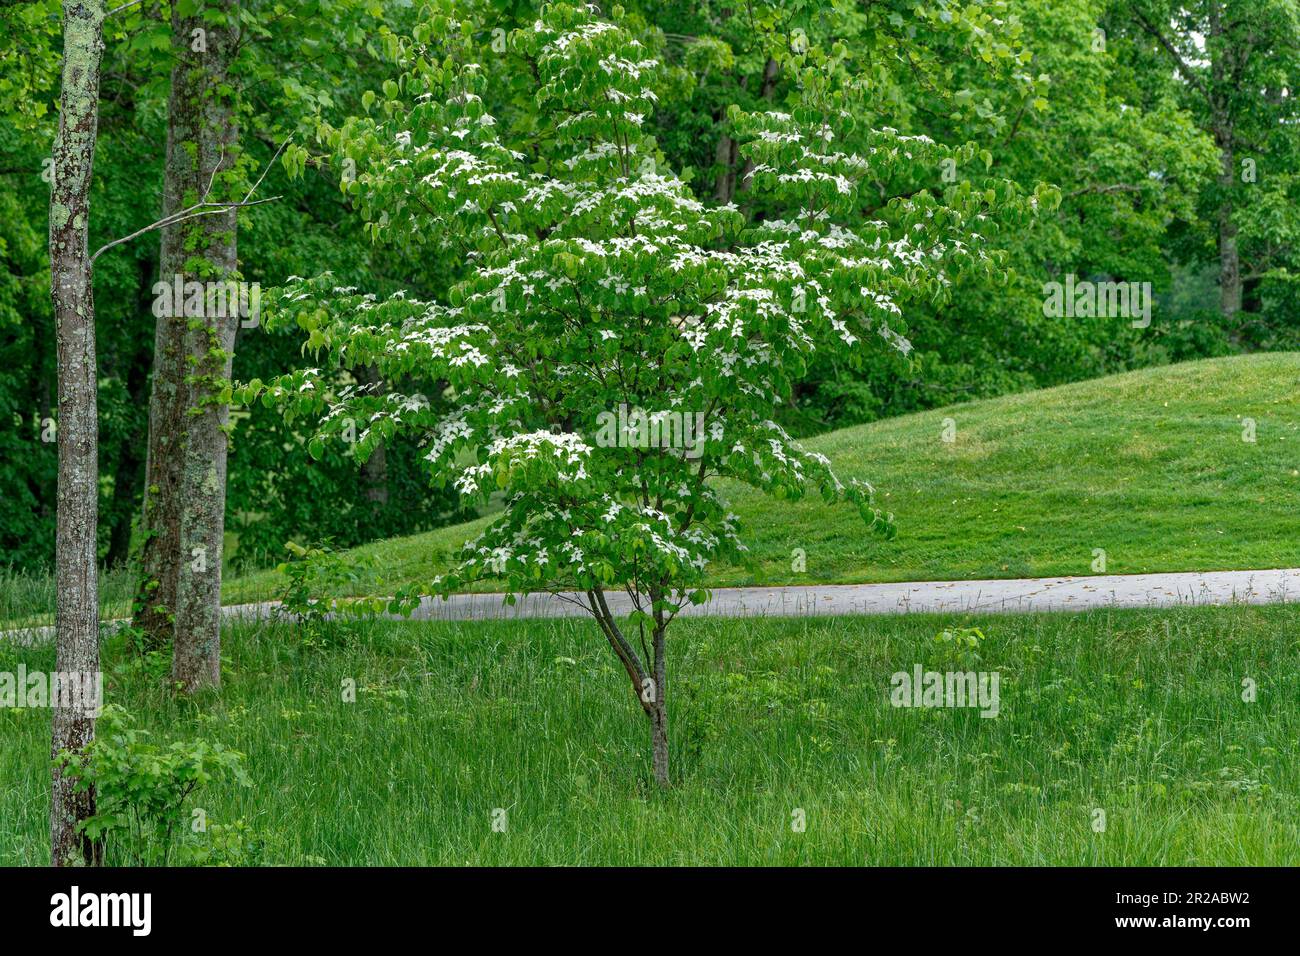 A small Korean dogwood tree with white pointy flowers and foliage in full bloom in late spring Stock Photo